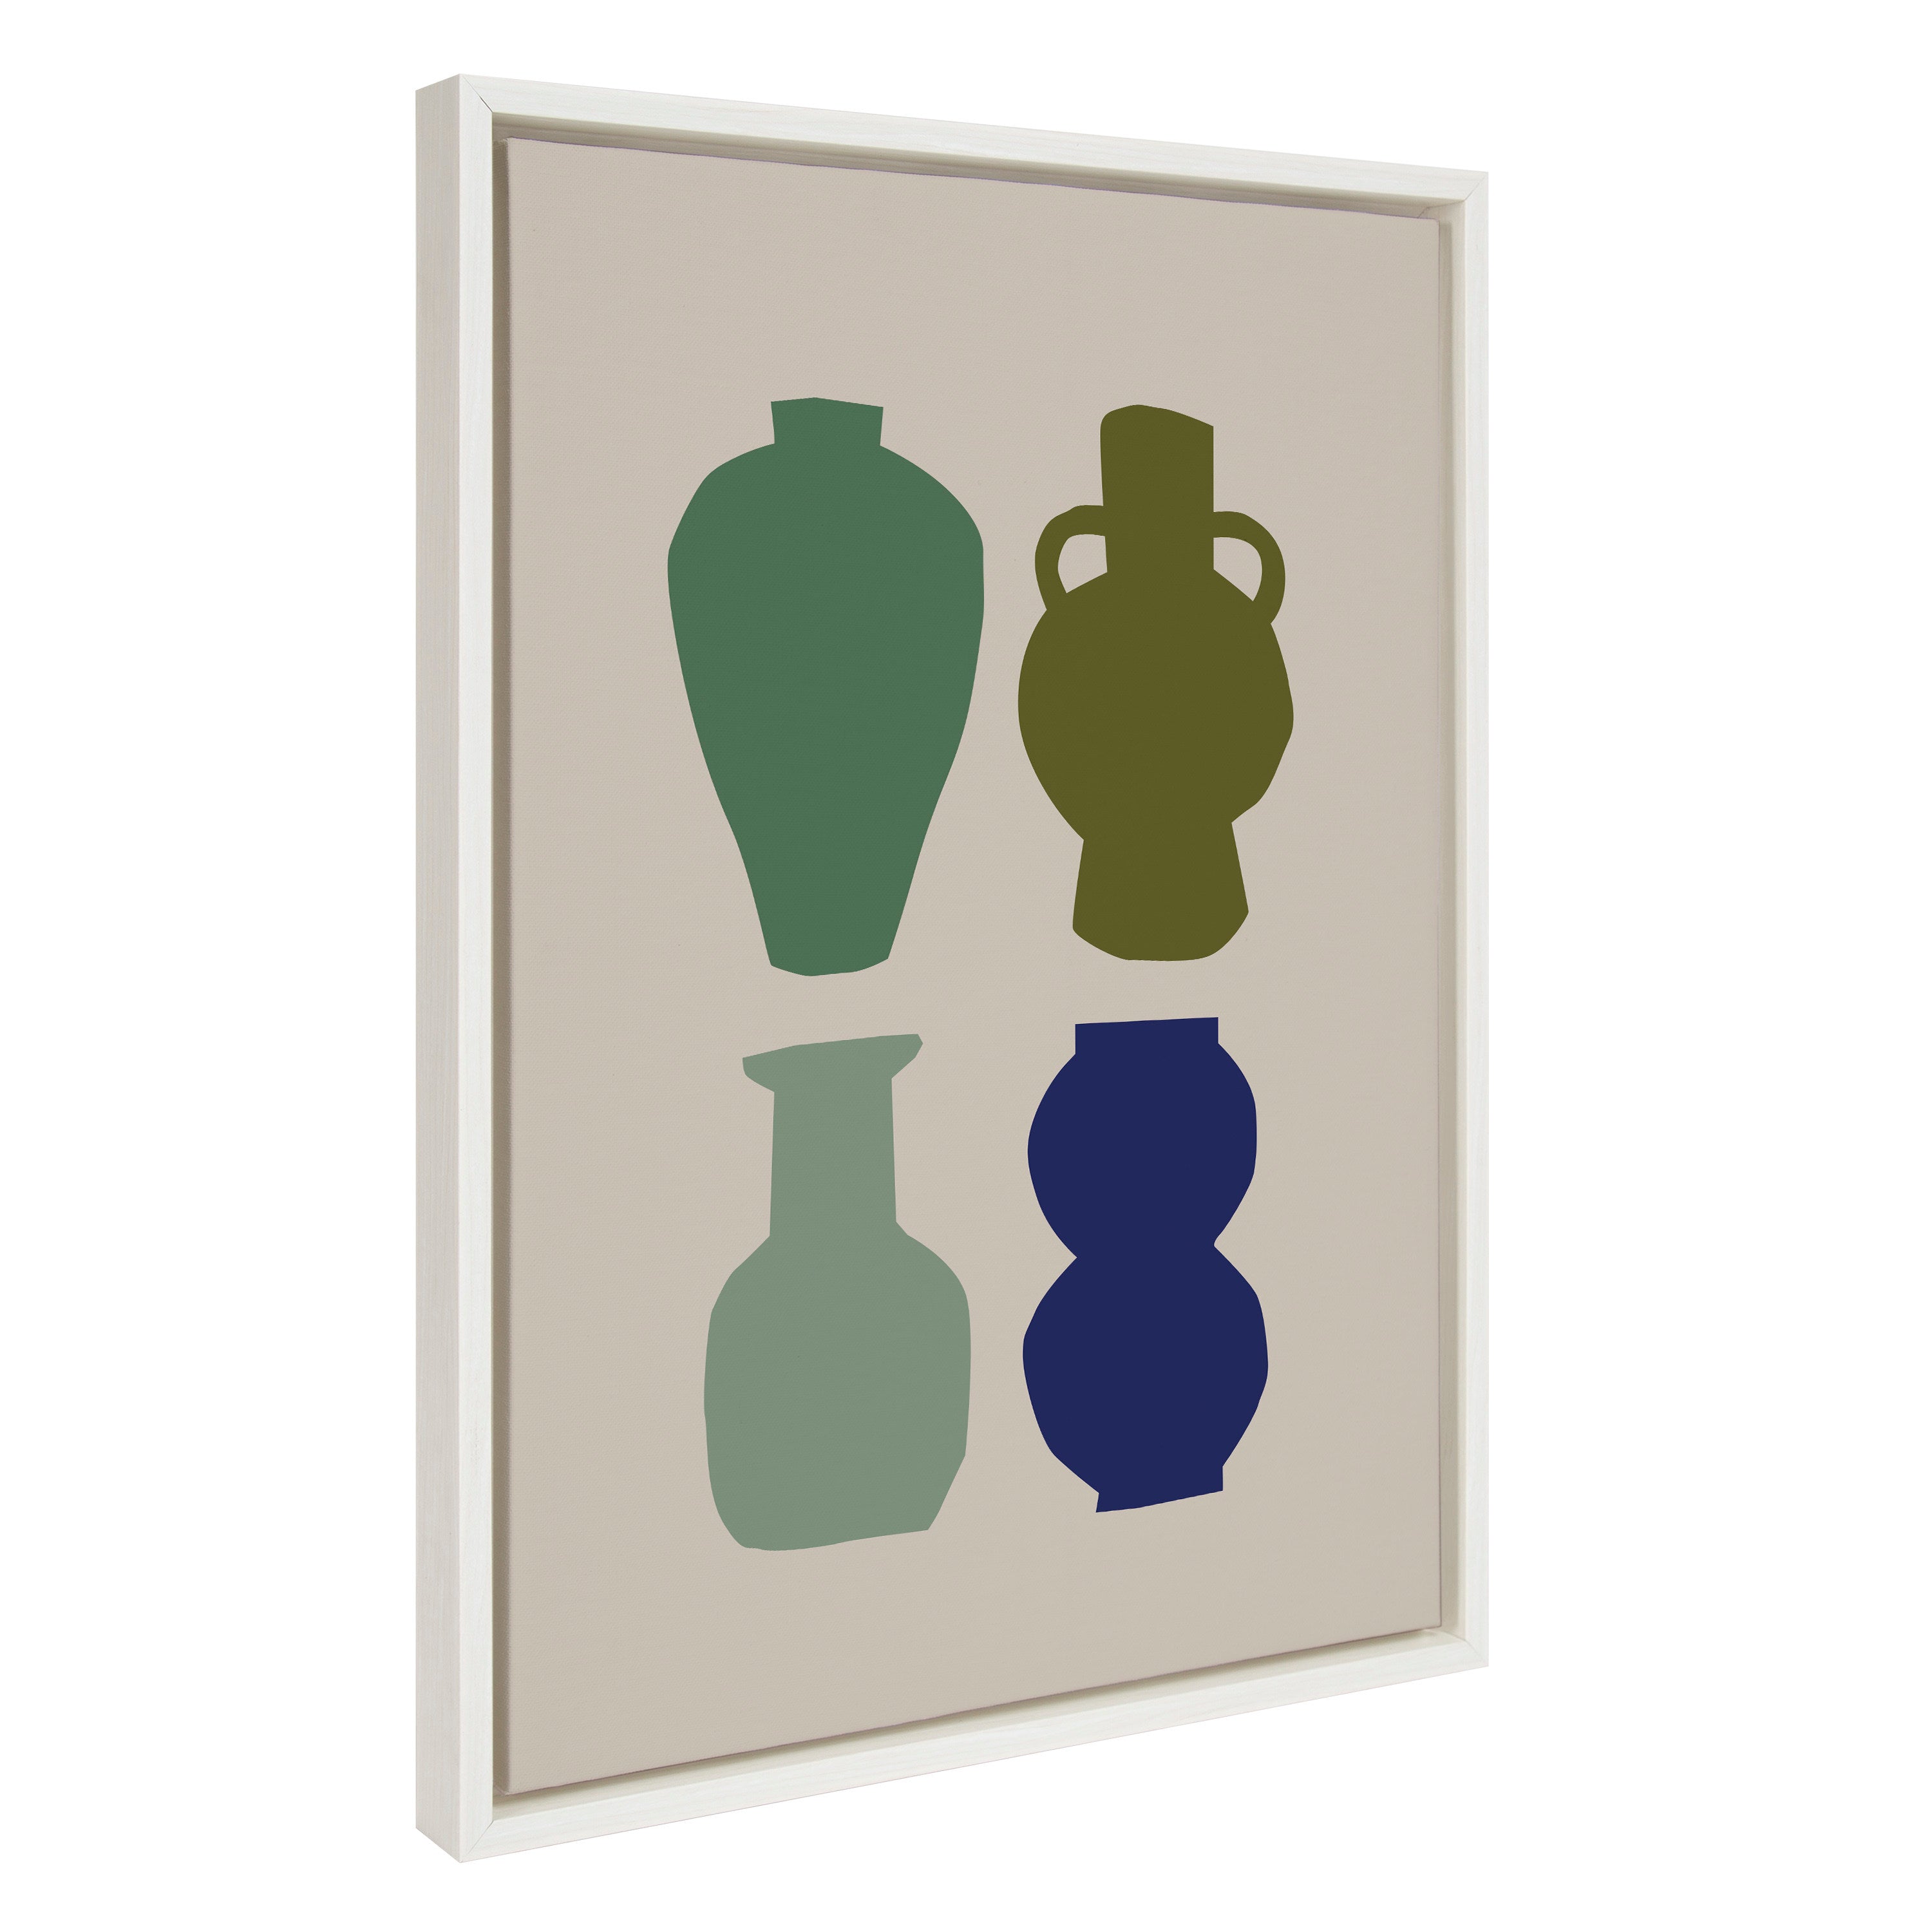 Sylvie Colorful Retro Vases Green and Blue Framed Canvas by The Creative Bunch Studio